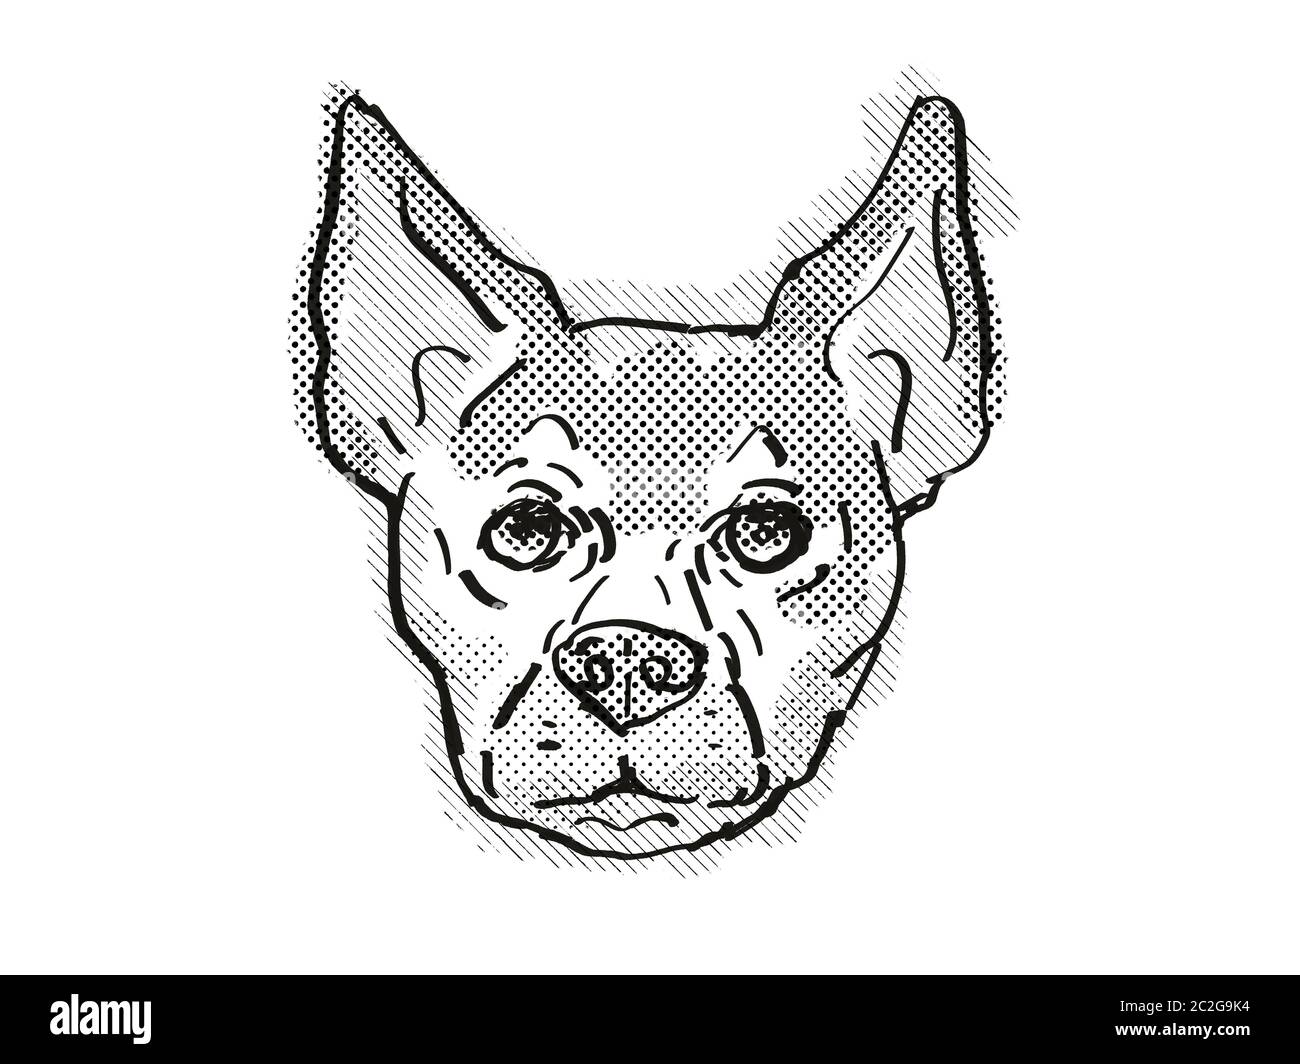 Retro cartoon style drawing of head of a Chihuahua, a domestic dog or canine breed on isolated white background done in black and white. Stock Photo